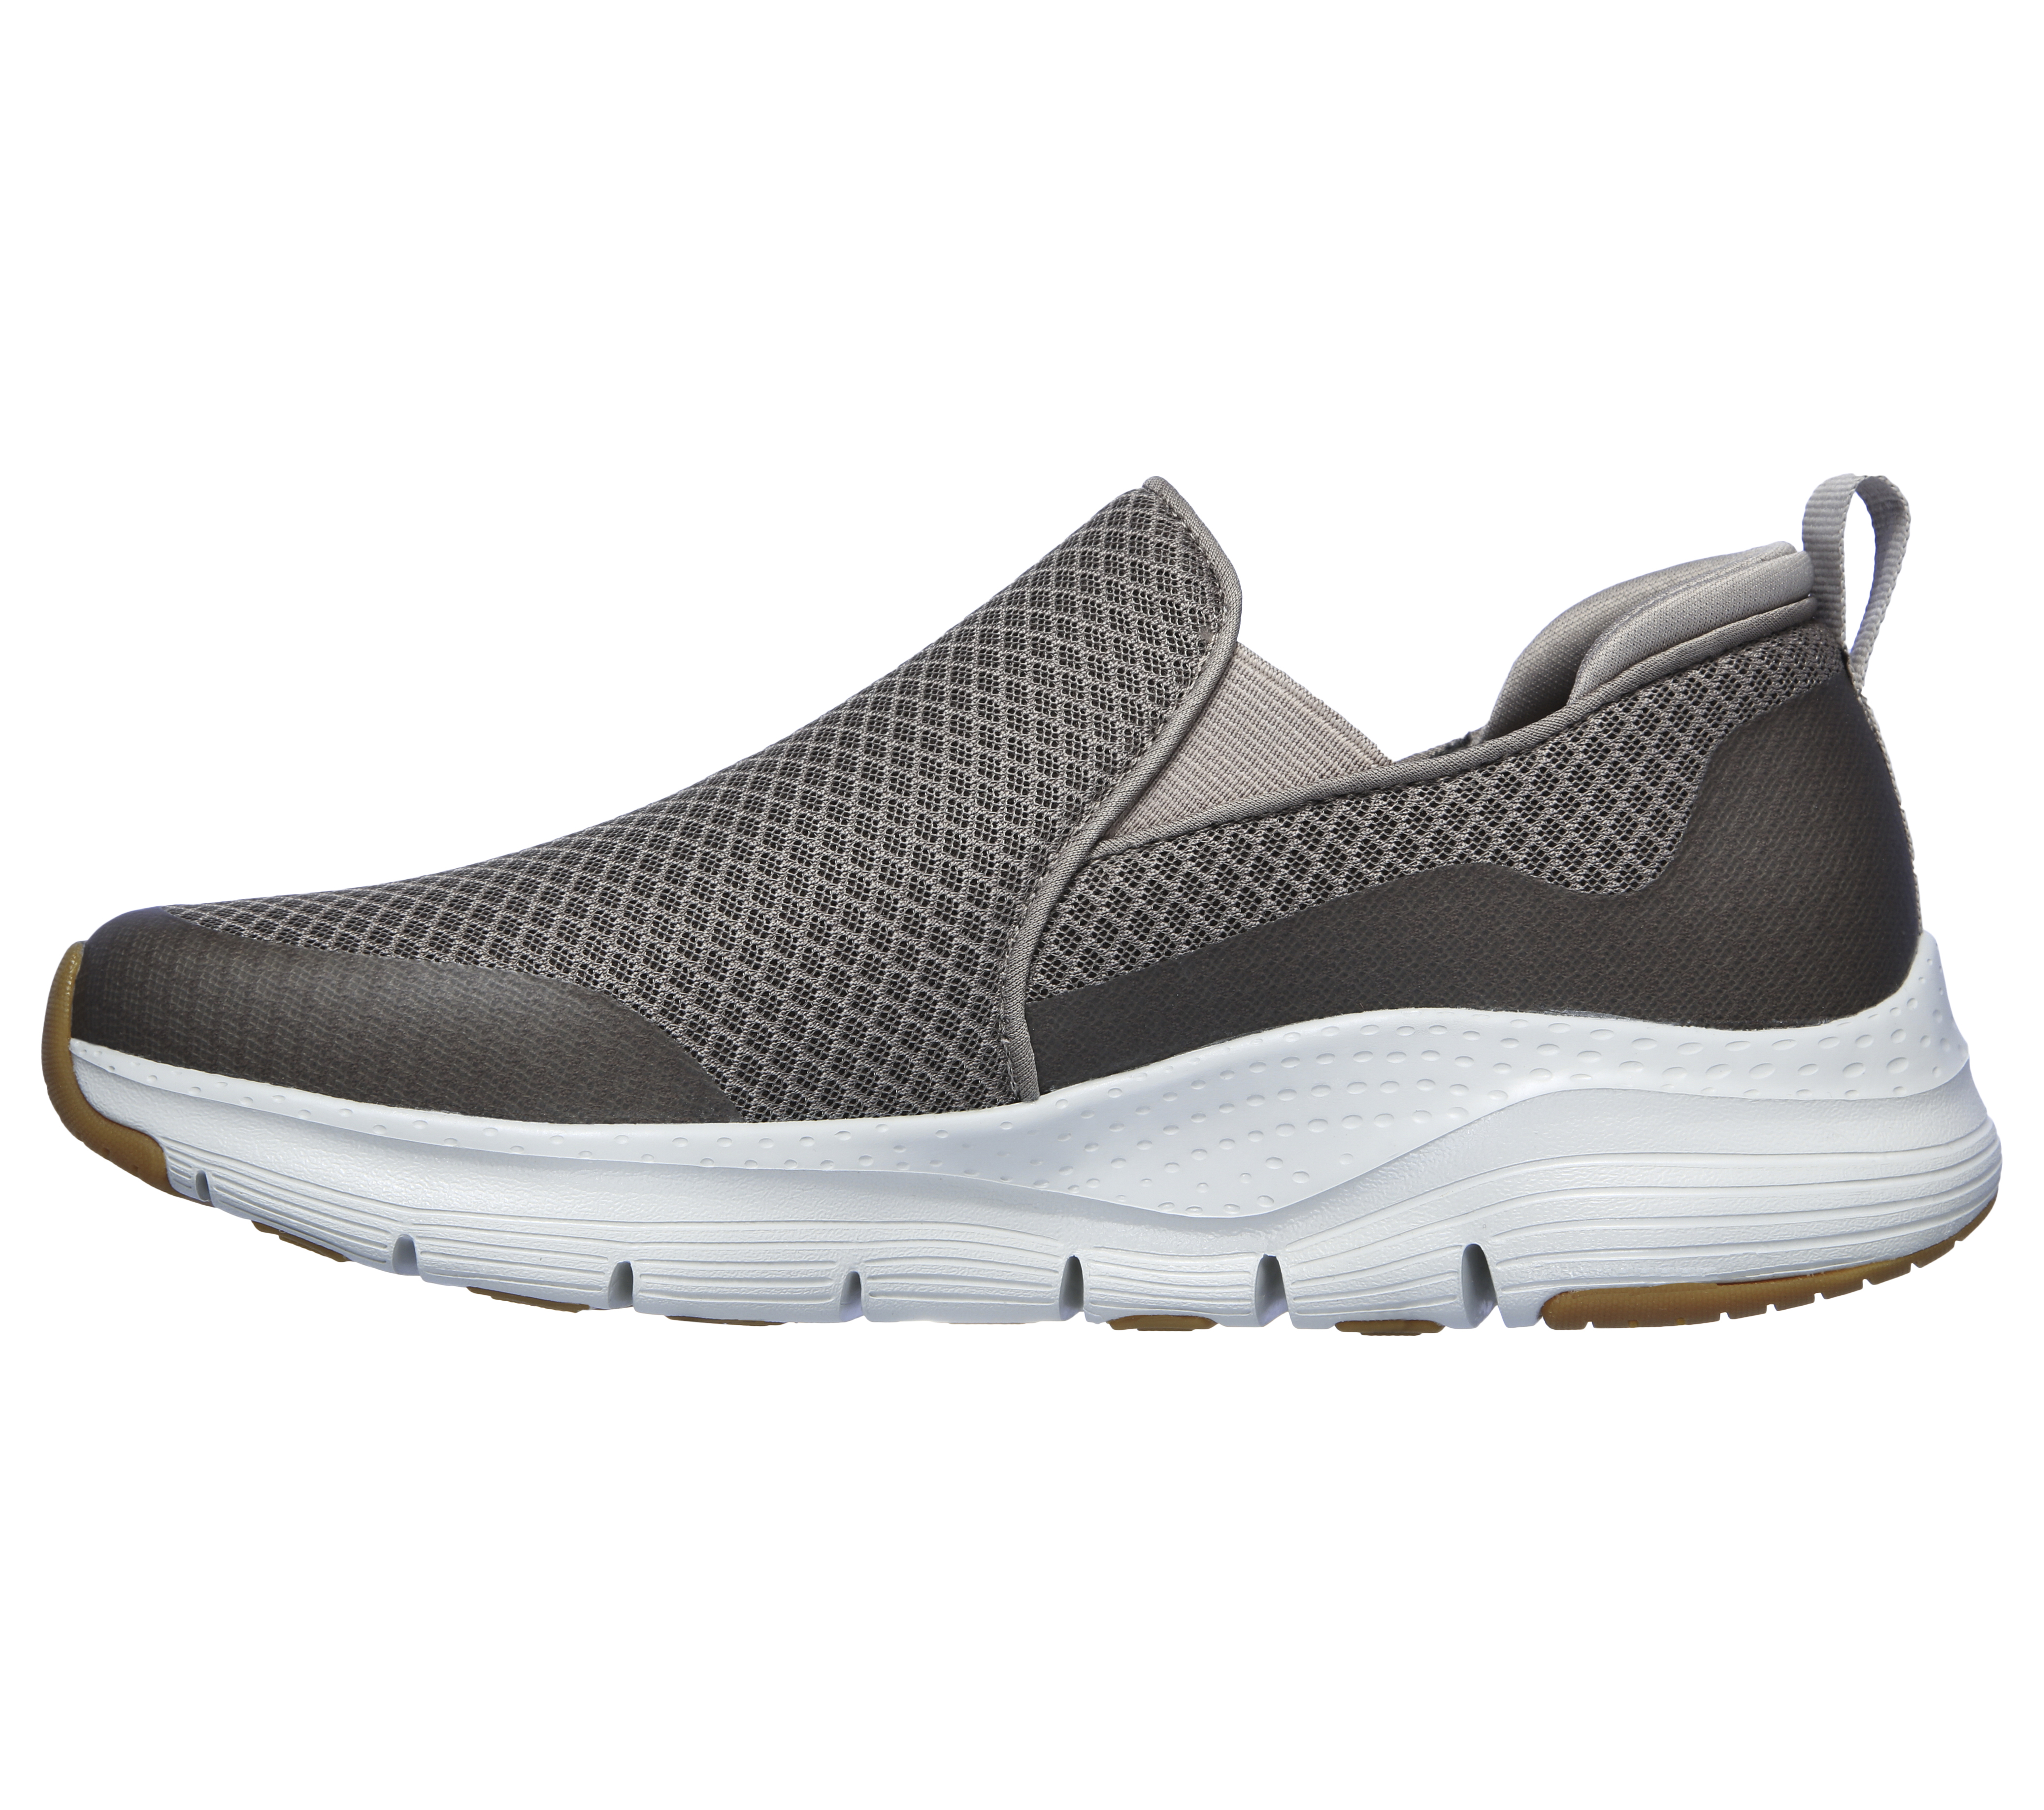 men's skechers with arch support